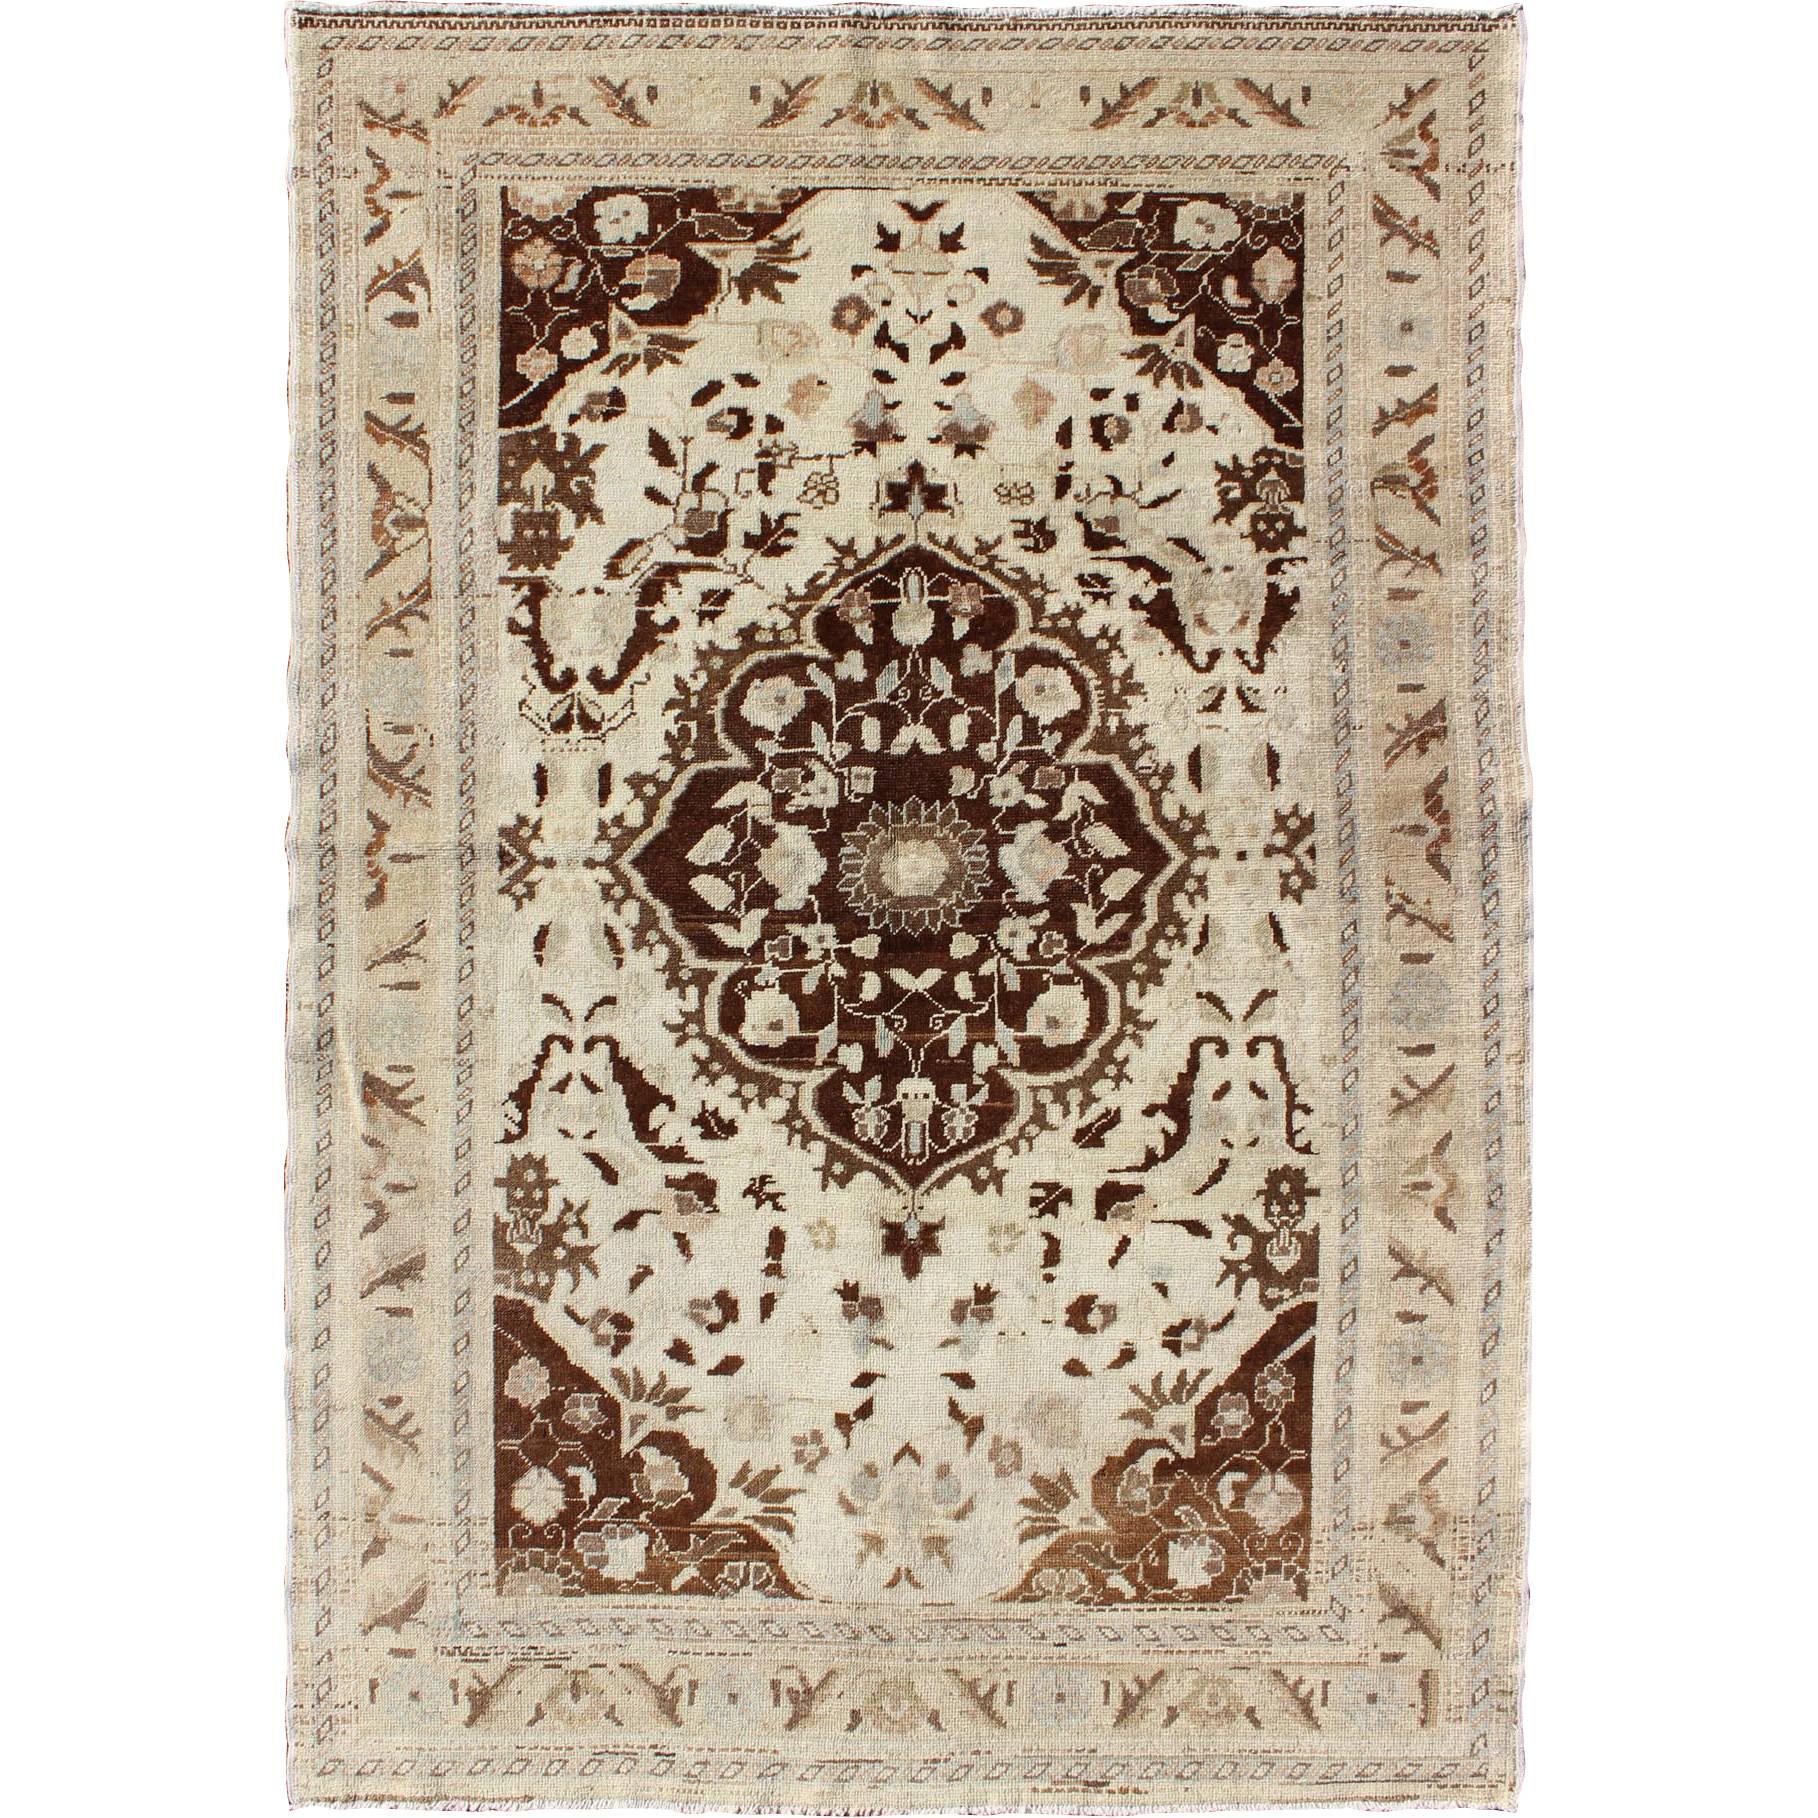 Turkish Oushak Vintage Rug with Intricate Floral Medallion in Brown and Ivory